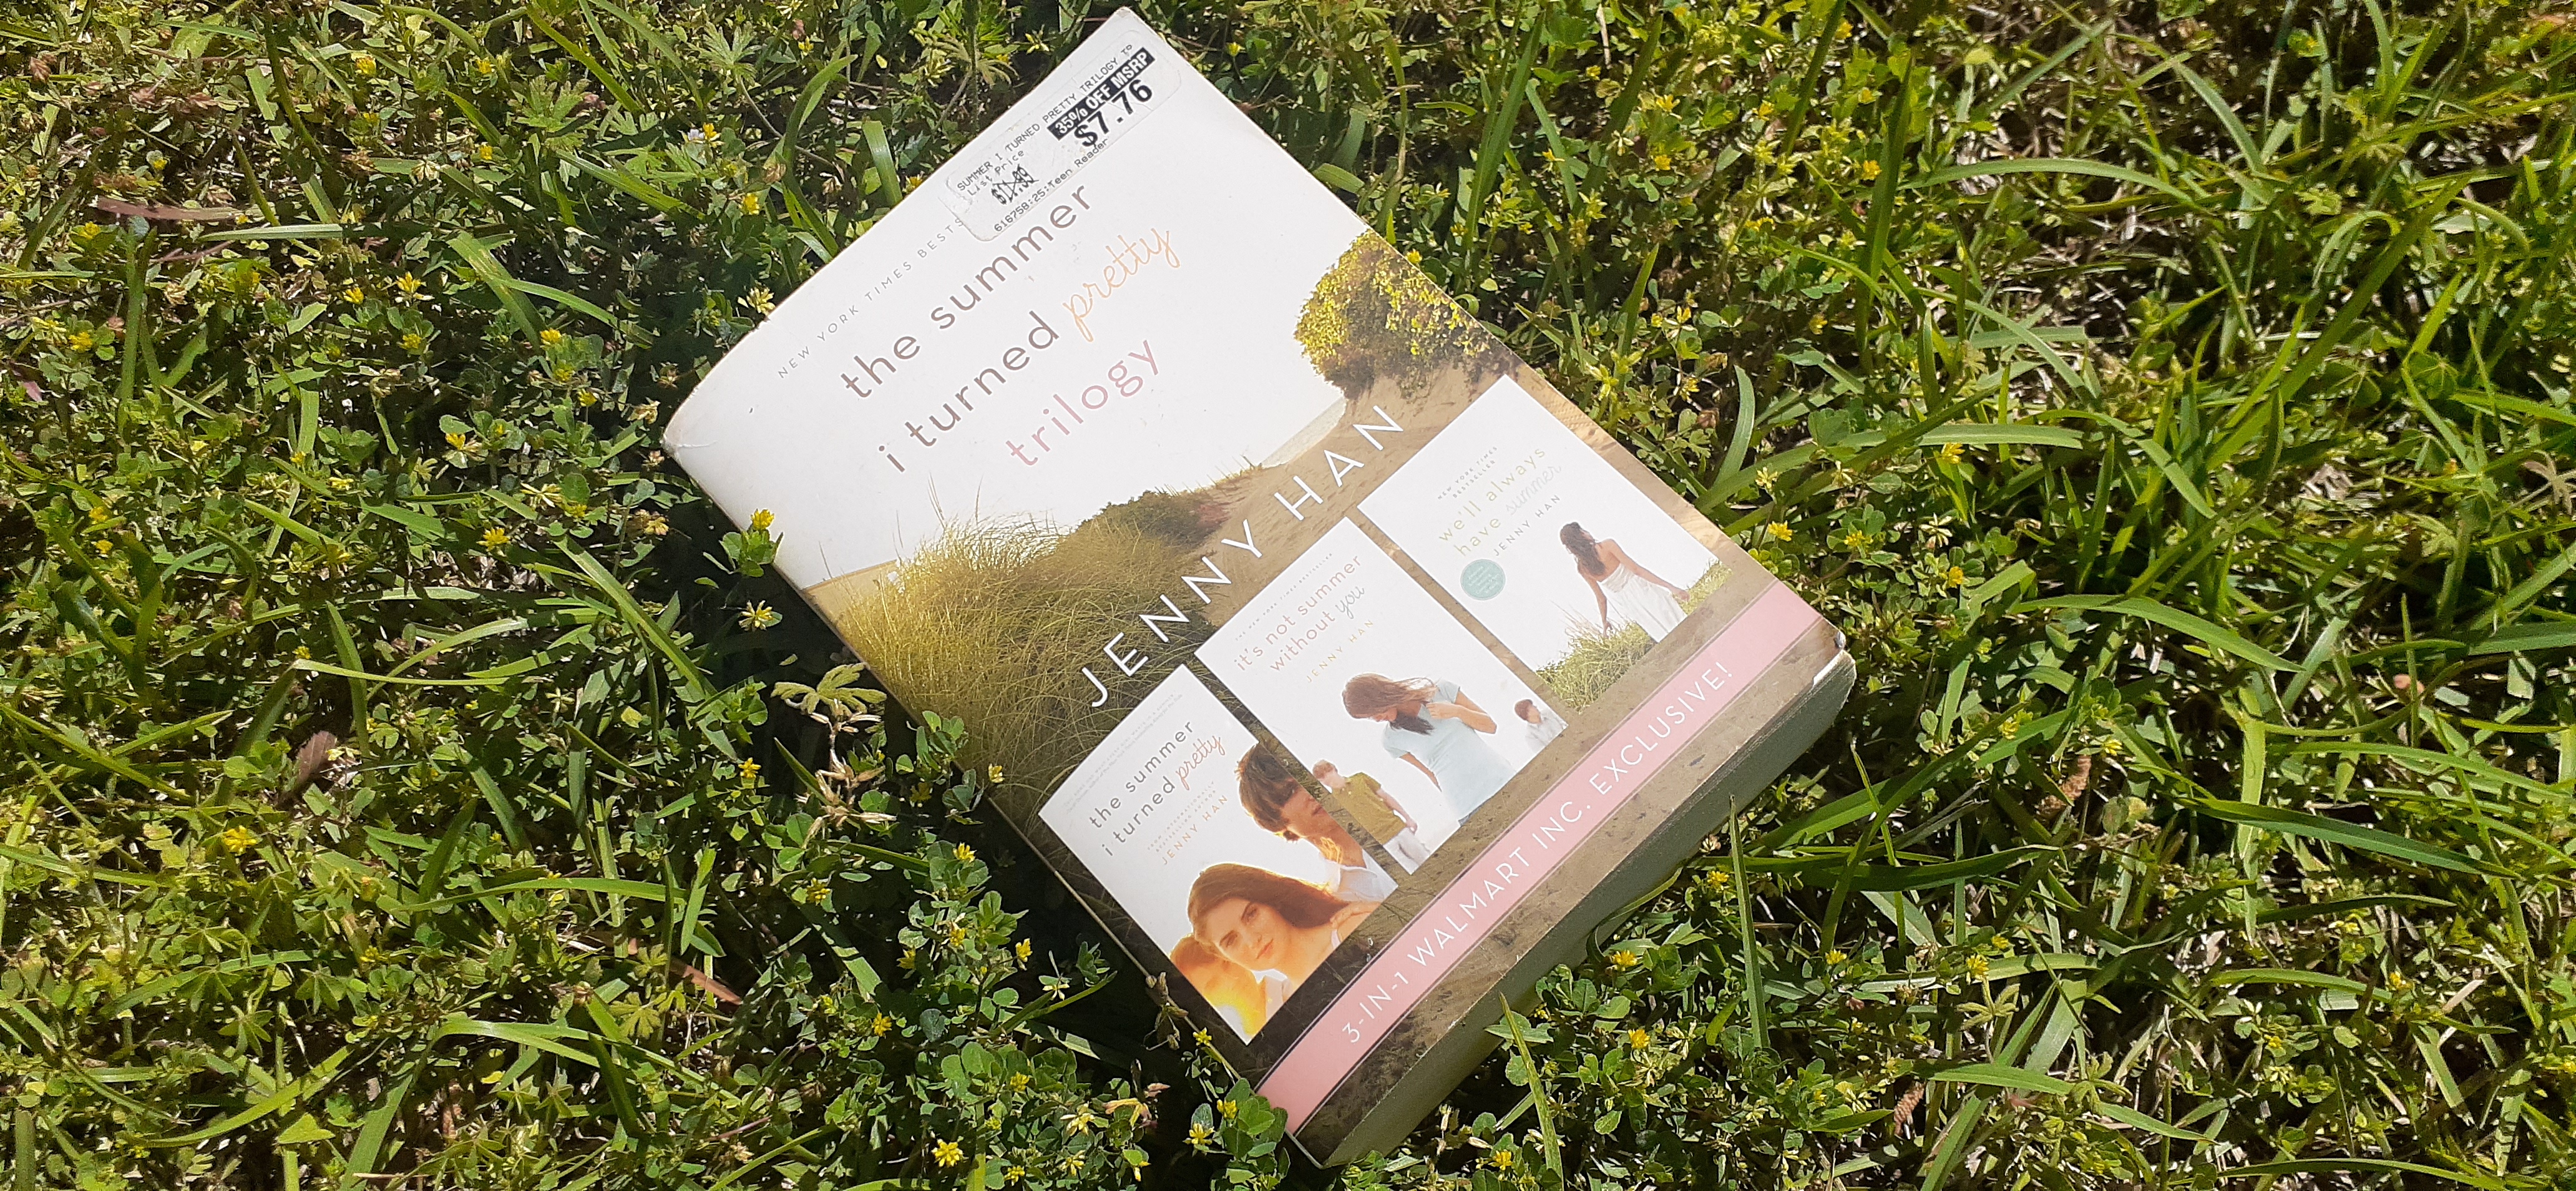 a big white book with a girl and two boys on the cover lies in the grass in the sun